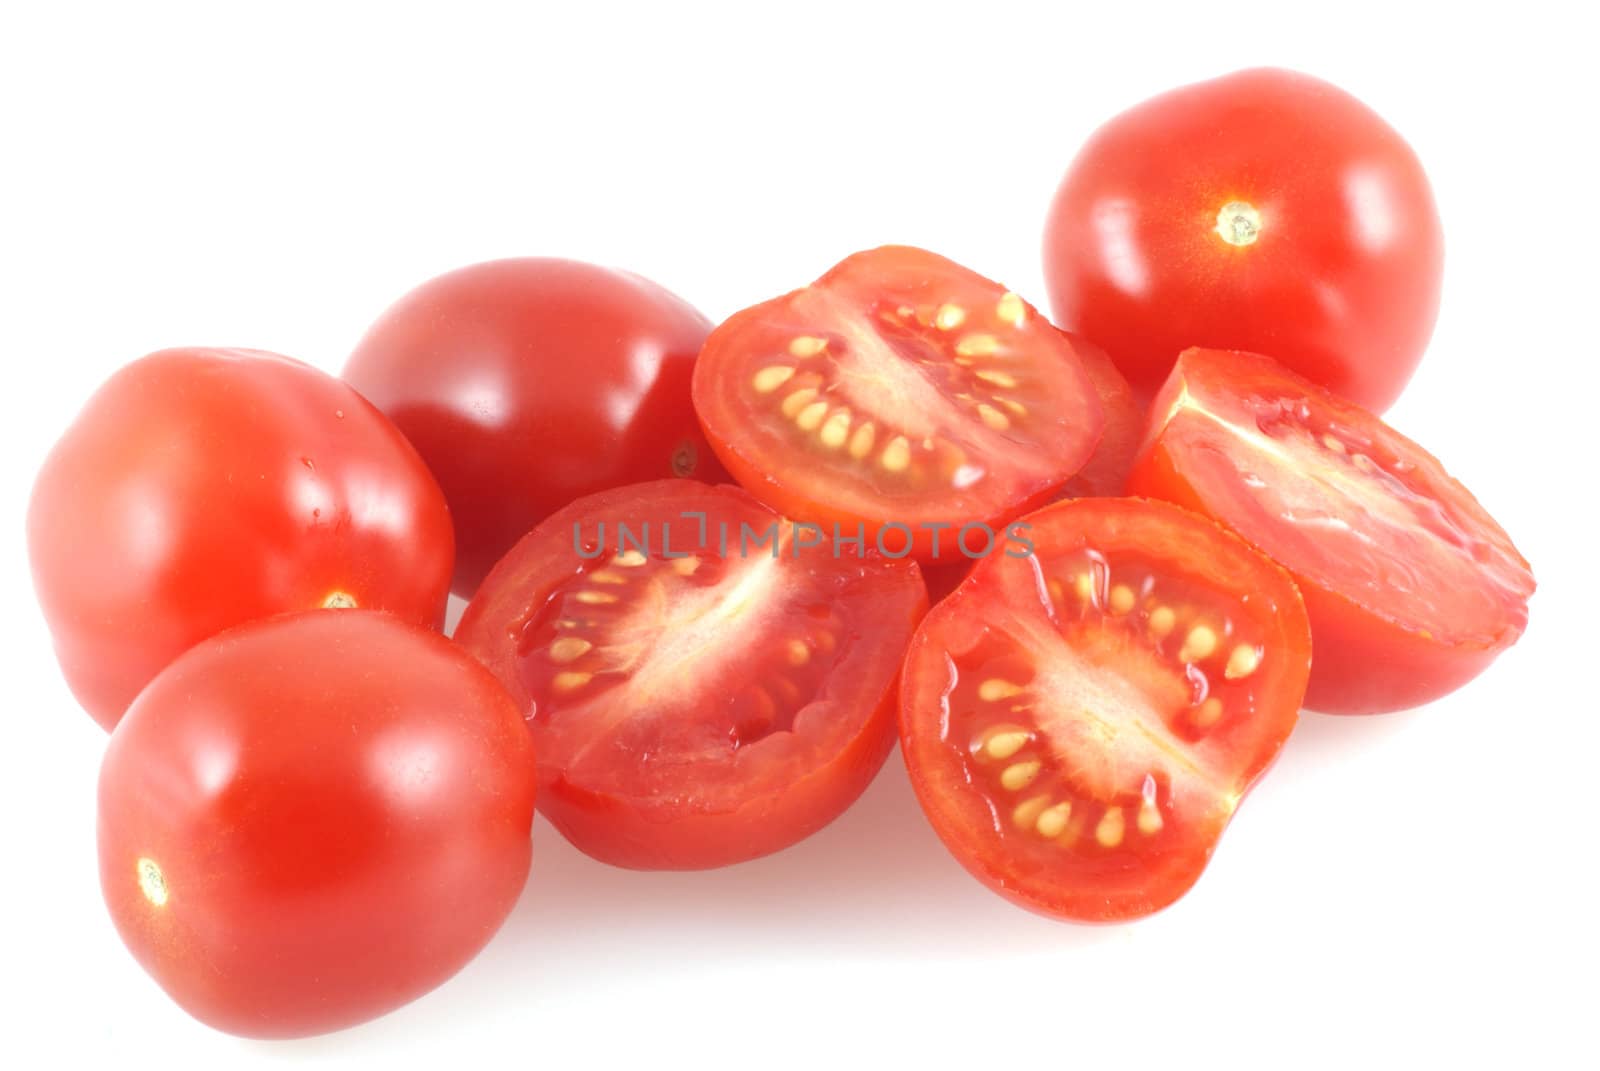 Cherrytomatoes isolated on white and few of them are cut in half.